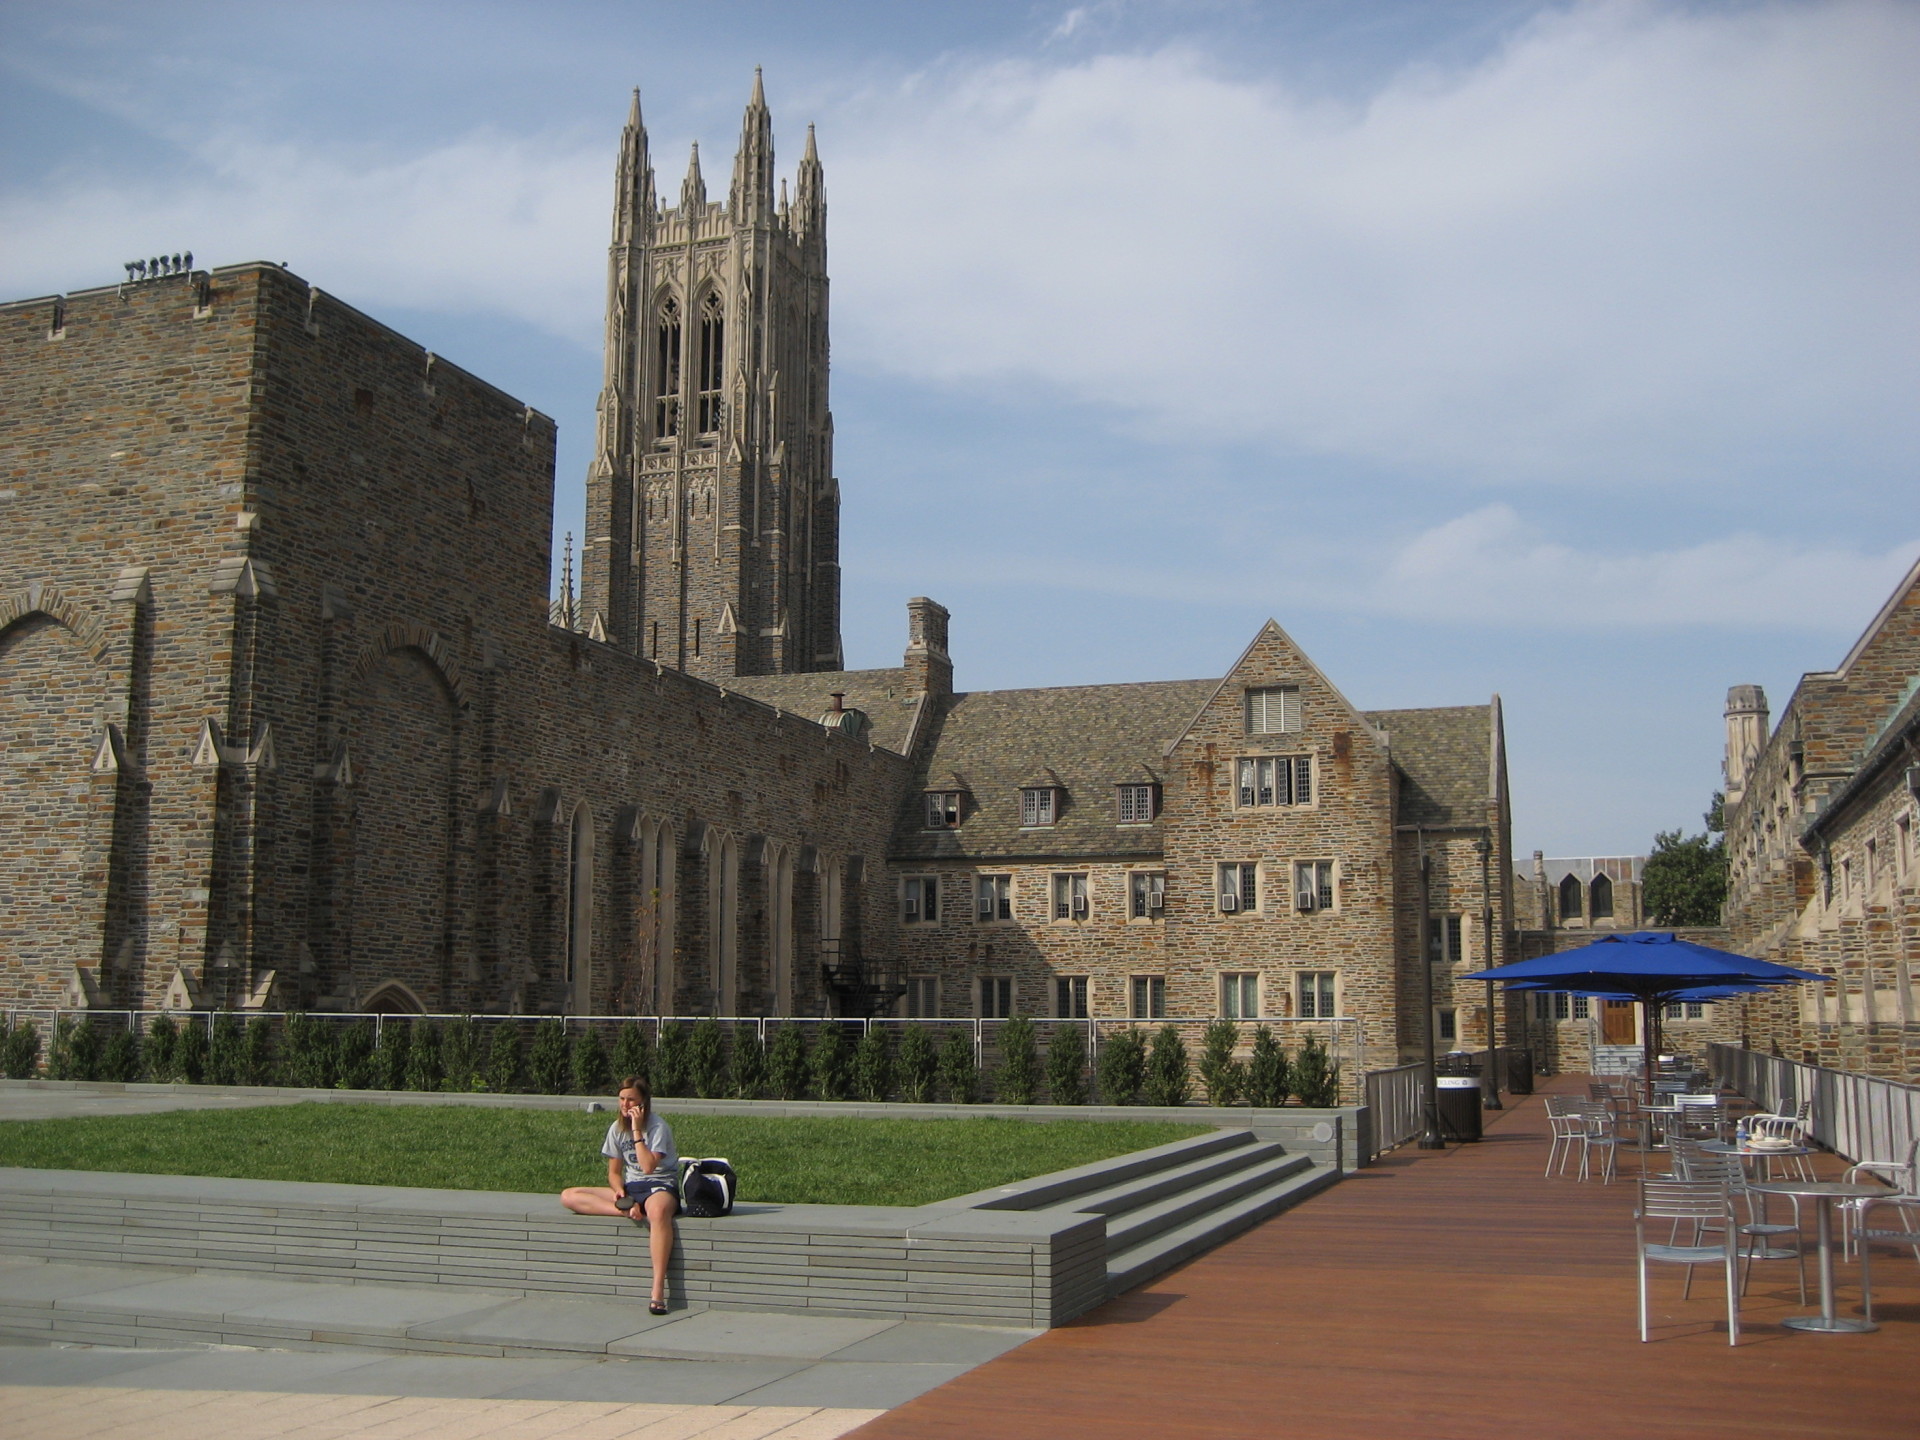 Duke University is one of North Carolina's Crown Jewels, and a key member of the renowned Research Triangle mentioned above. This photo of a student sitting outside of the Duke University chapel was taken from the Bryan Center walkway. The walkway was clo